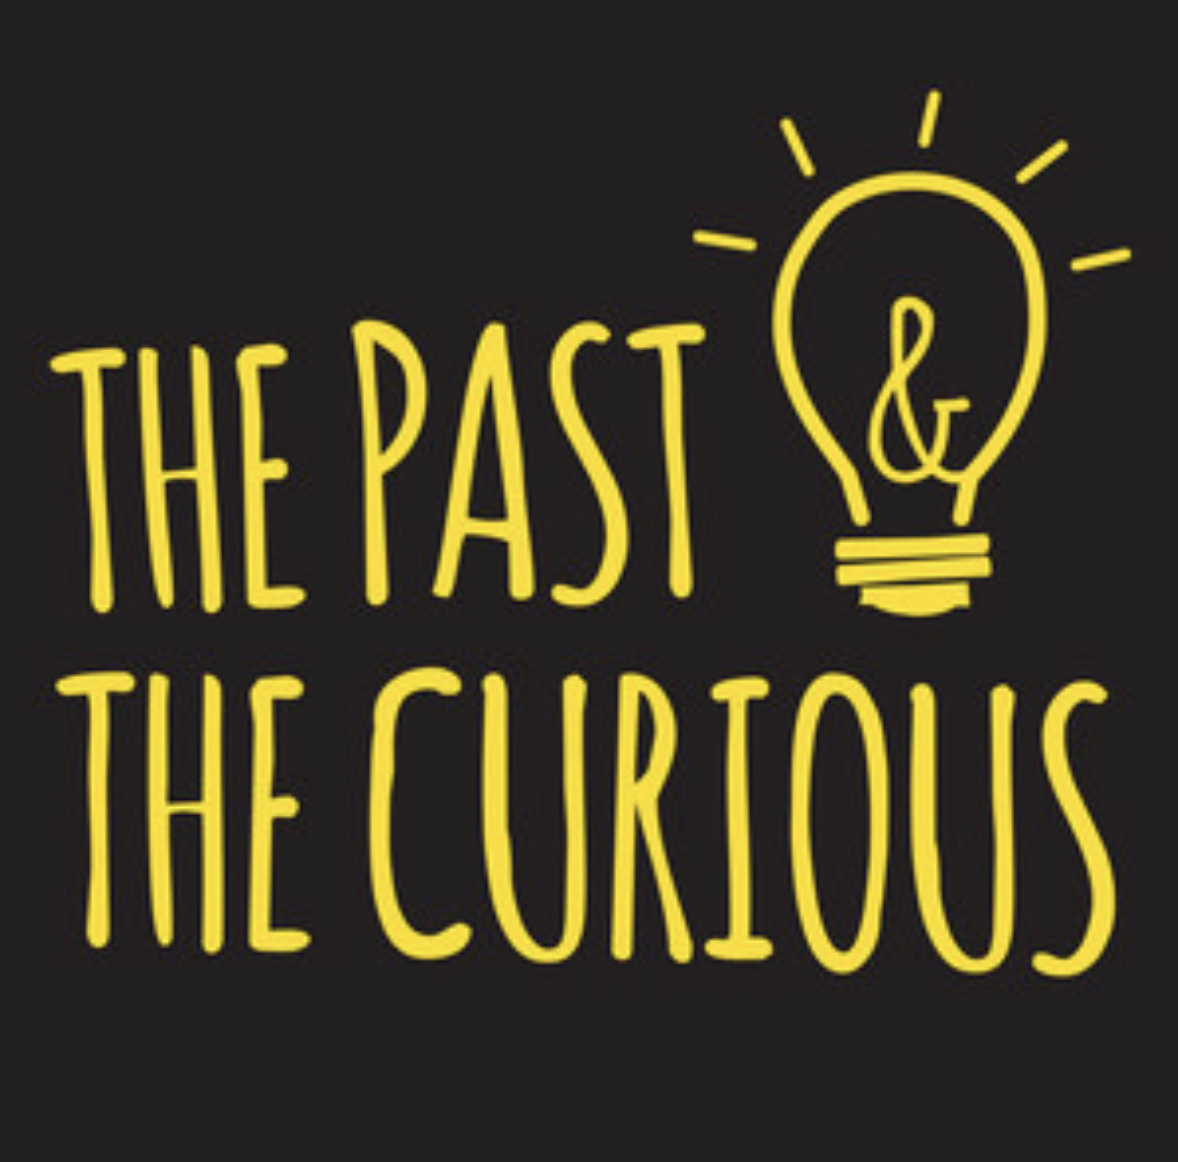 The Past & The Curious